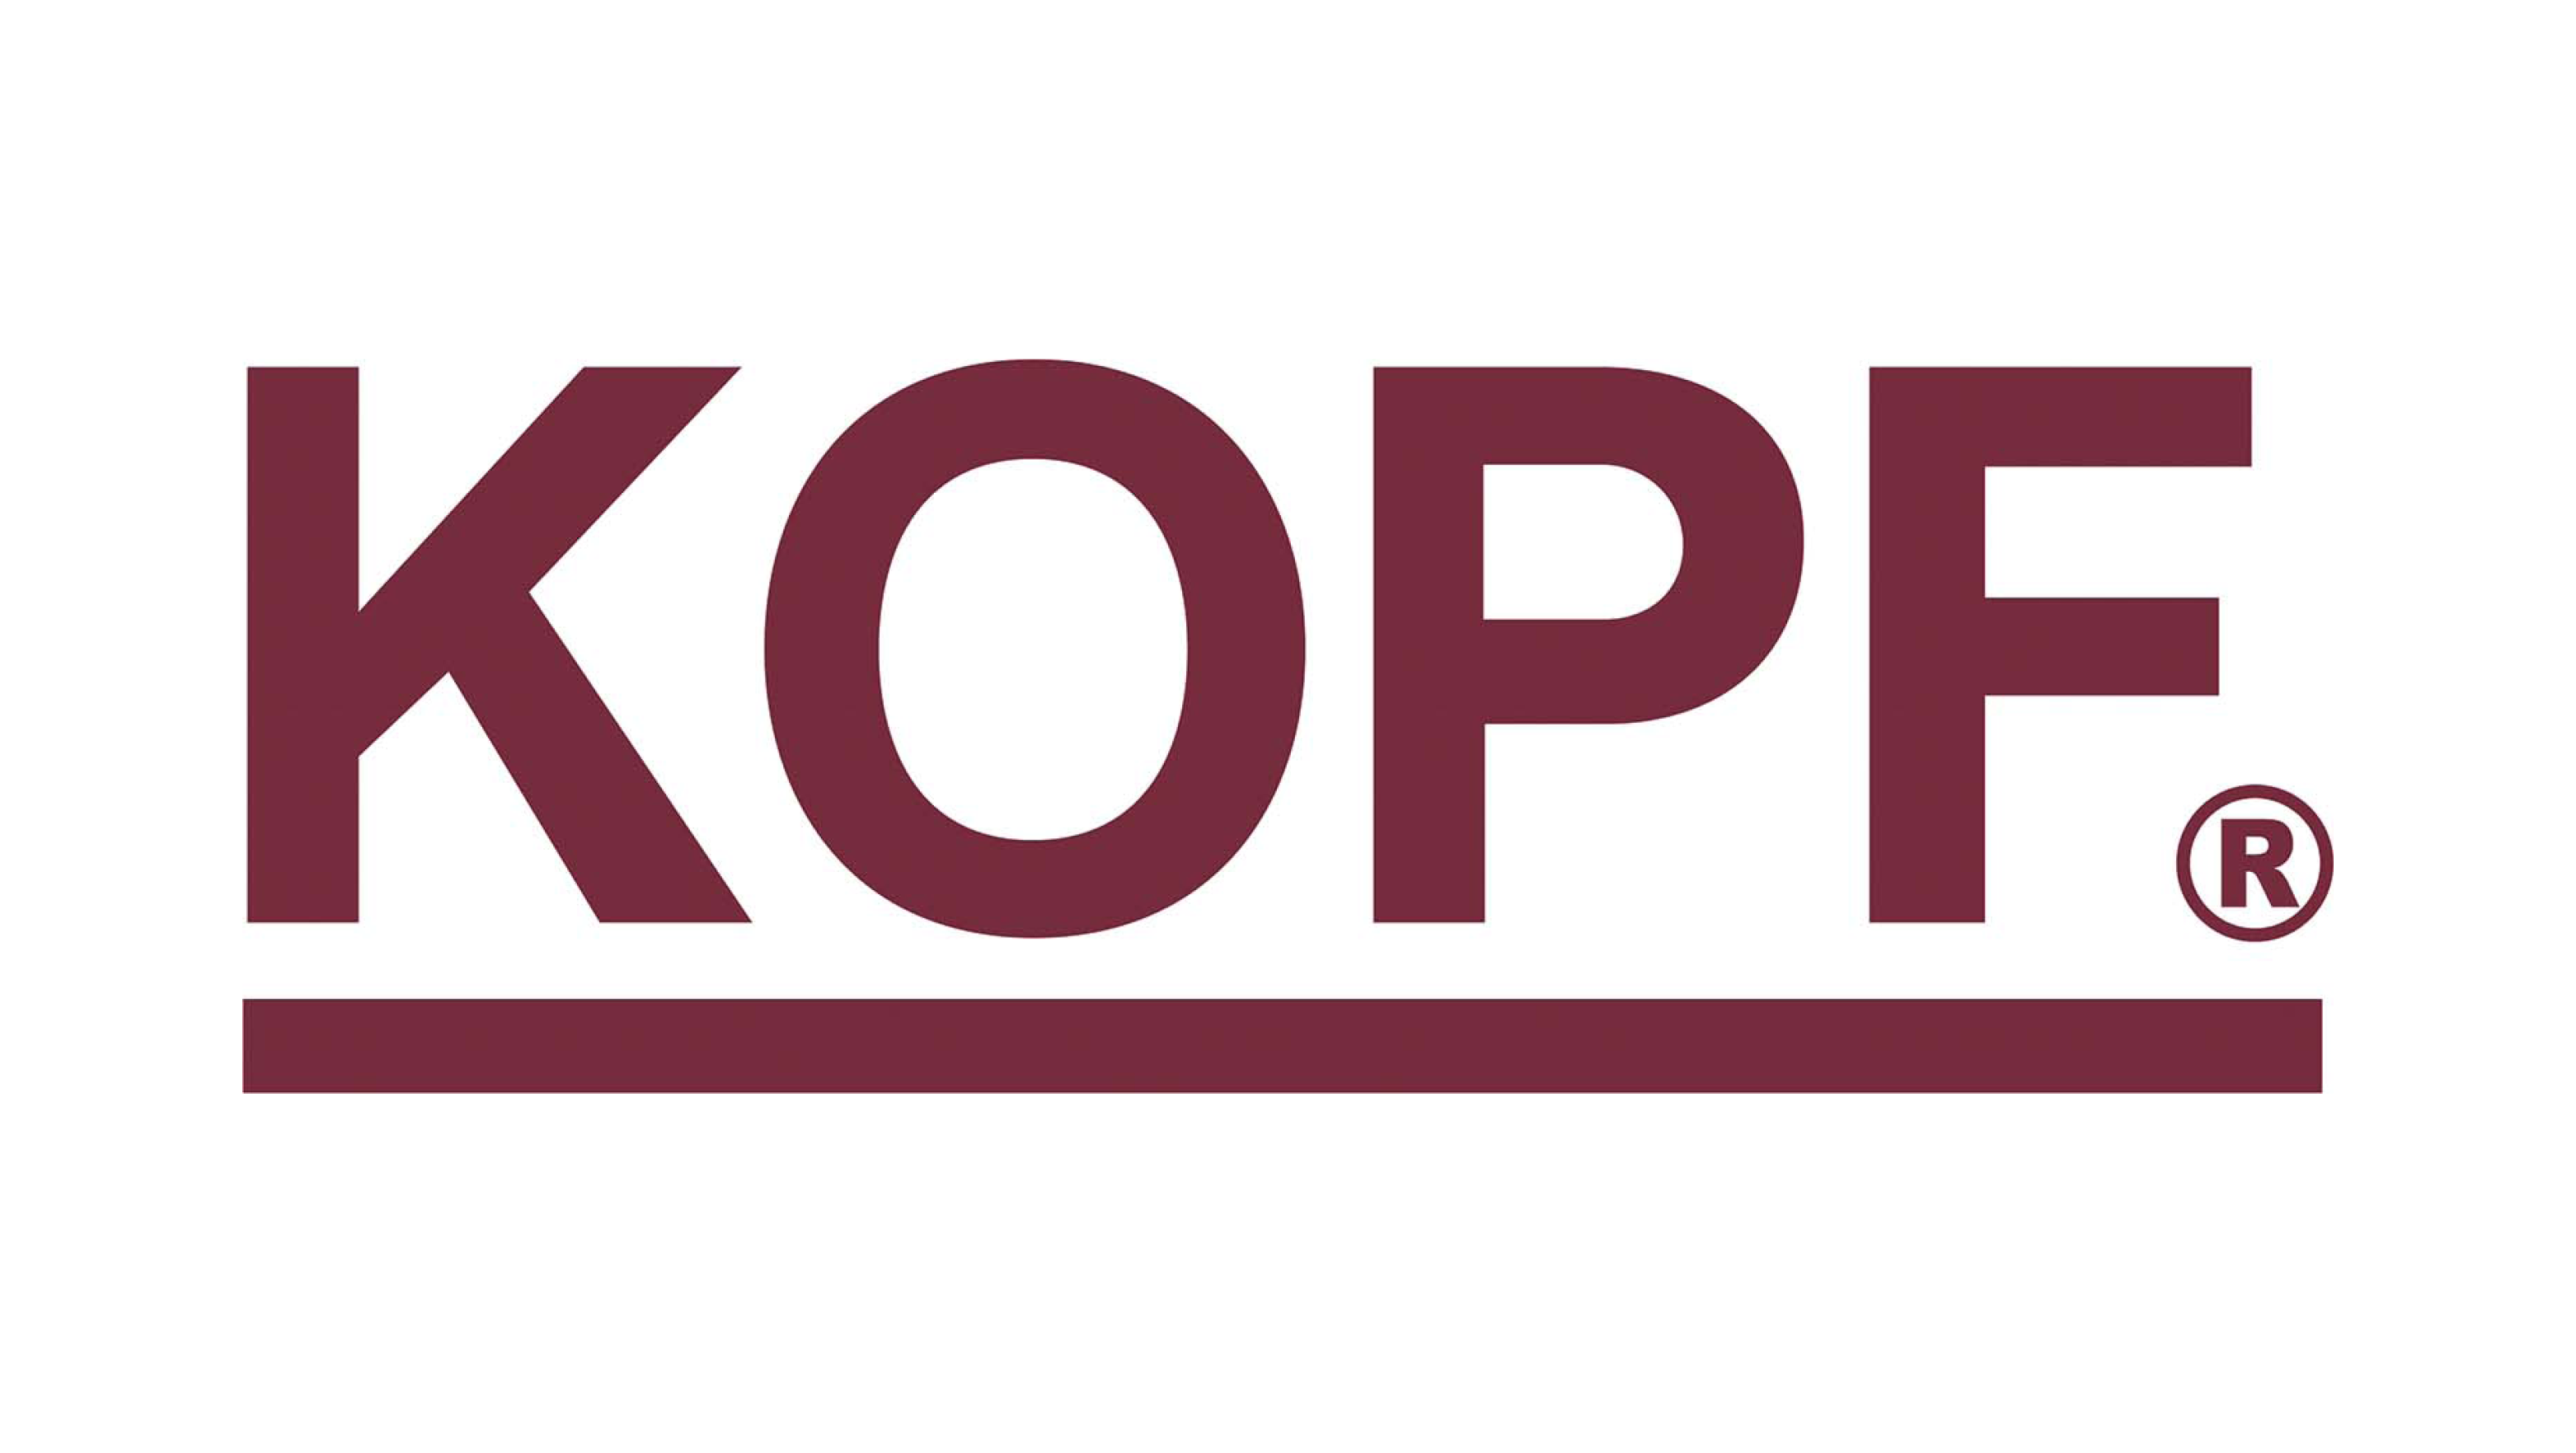 David Kopf Instruments is a Lecture and Event sponsor of Neuroscience 2021.